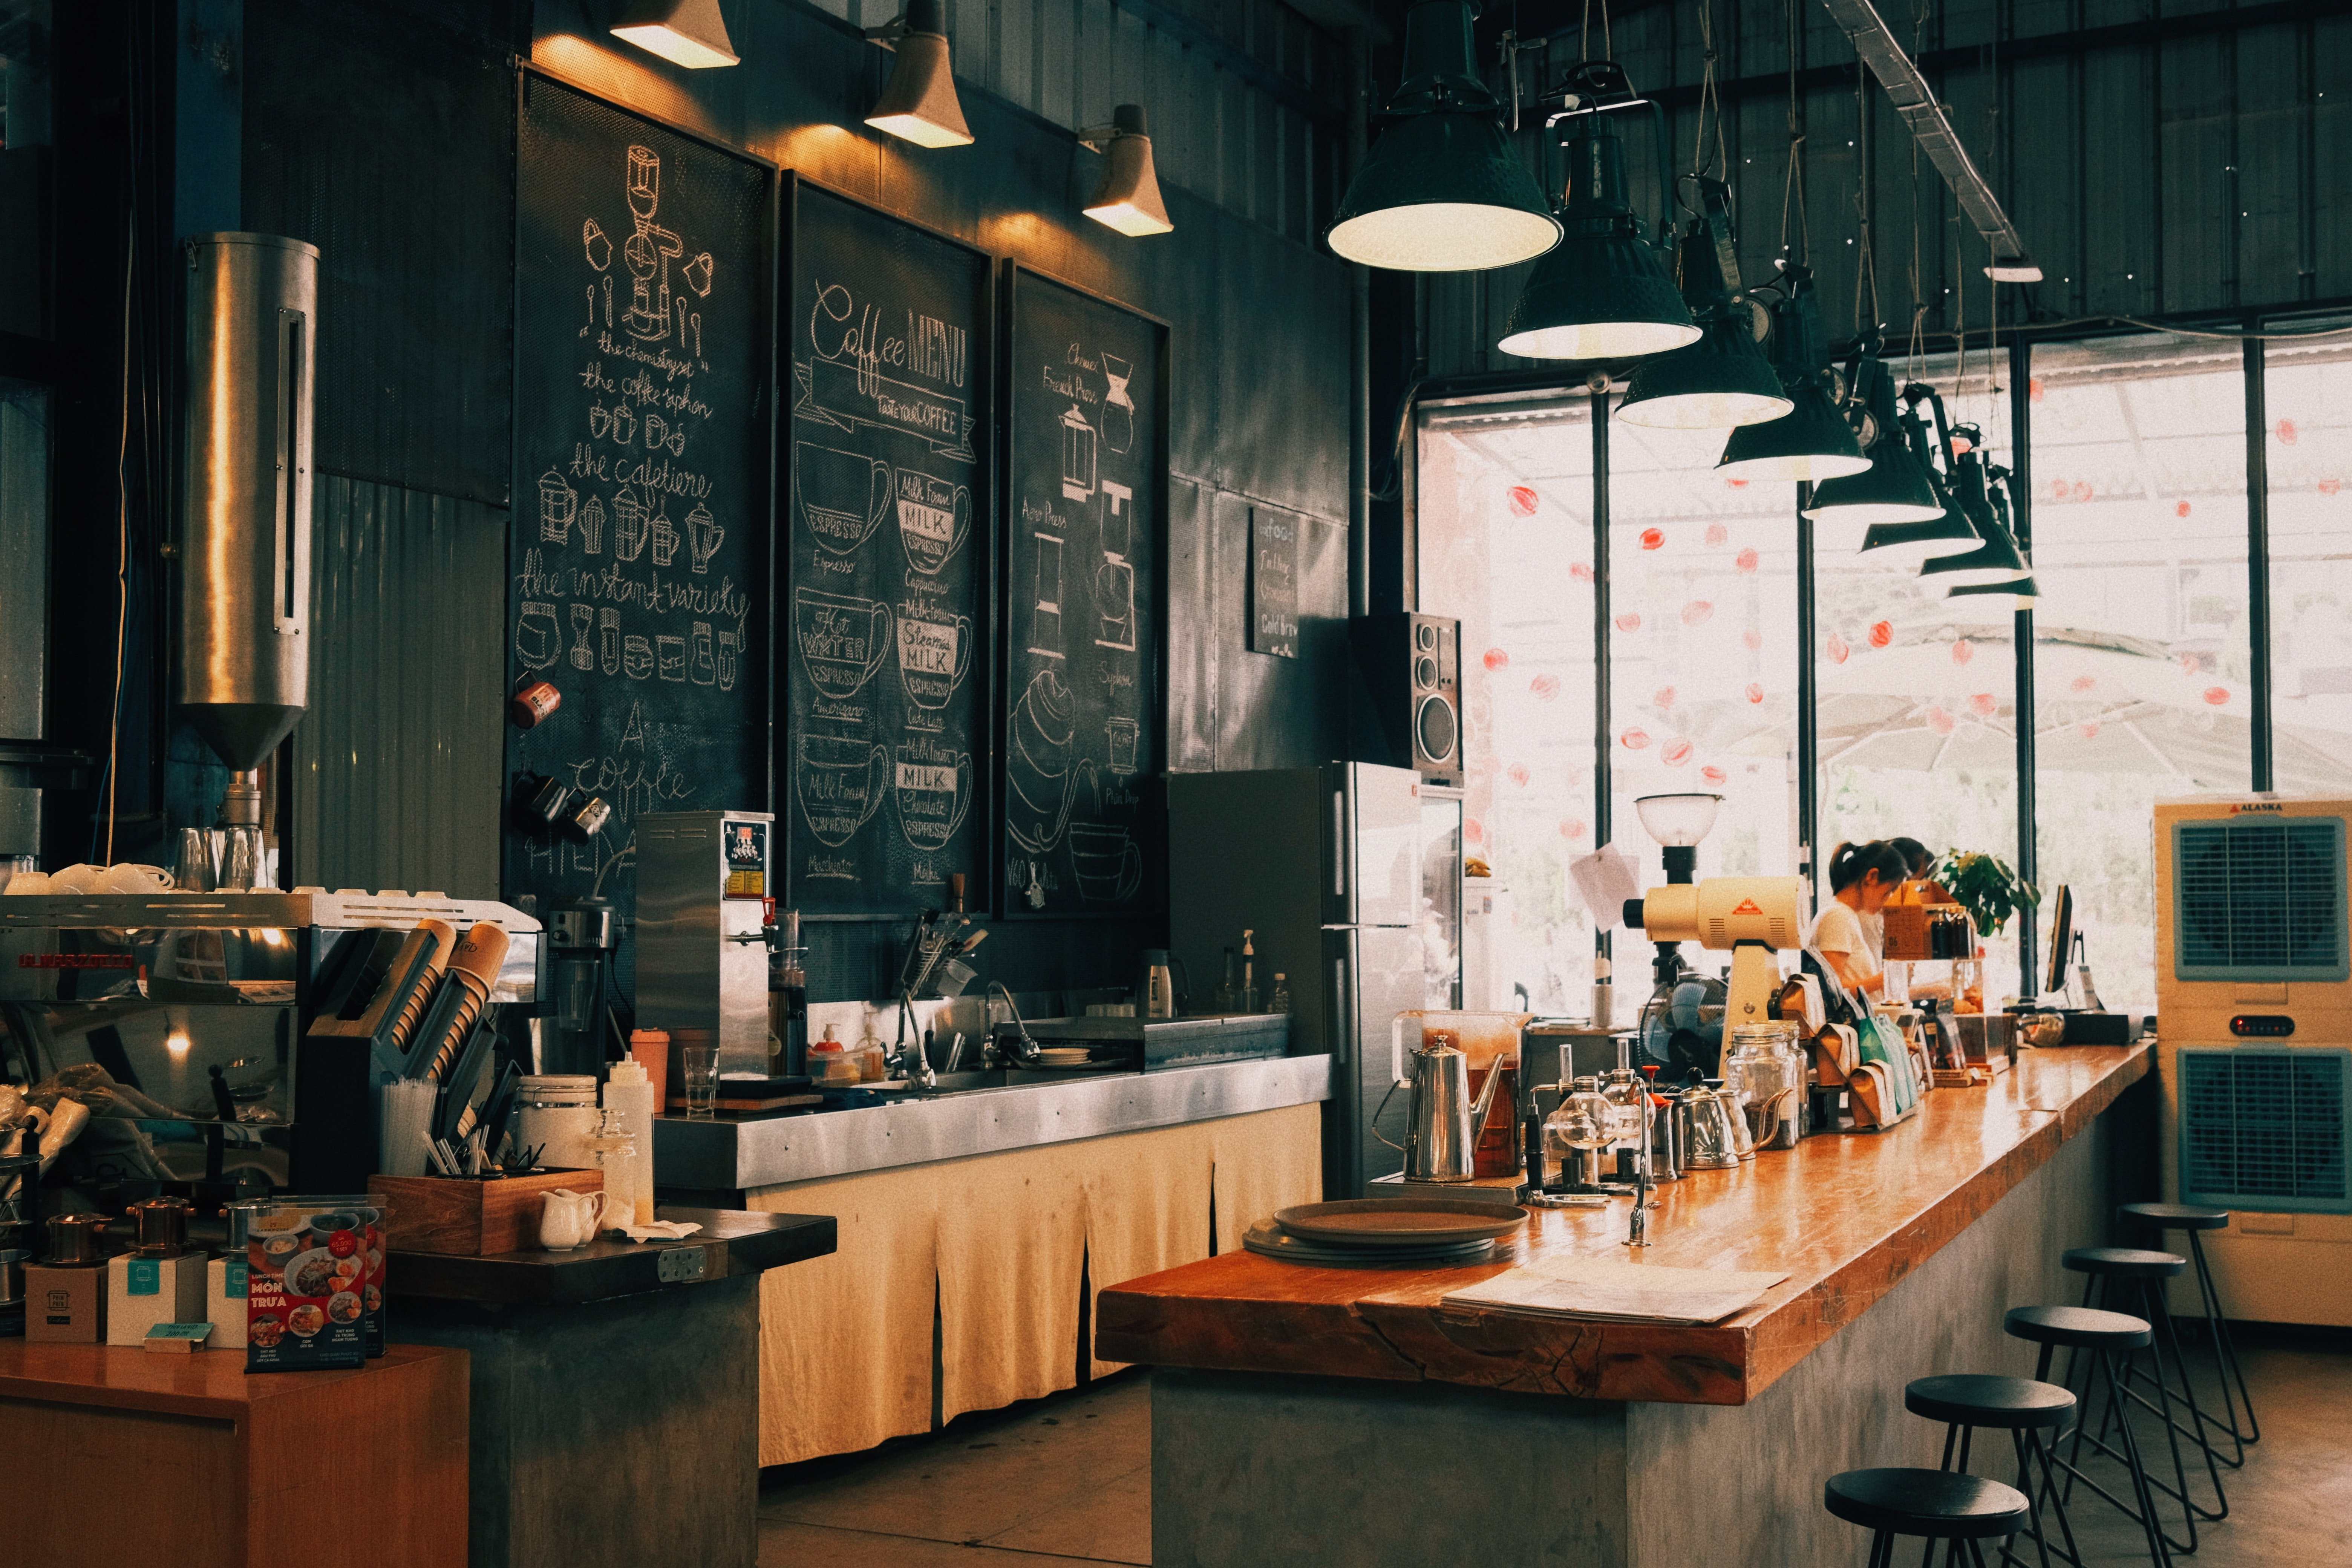 Debra and Howard went to a coffee shop | Photo: Pexels